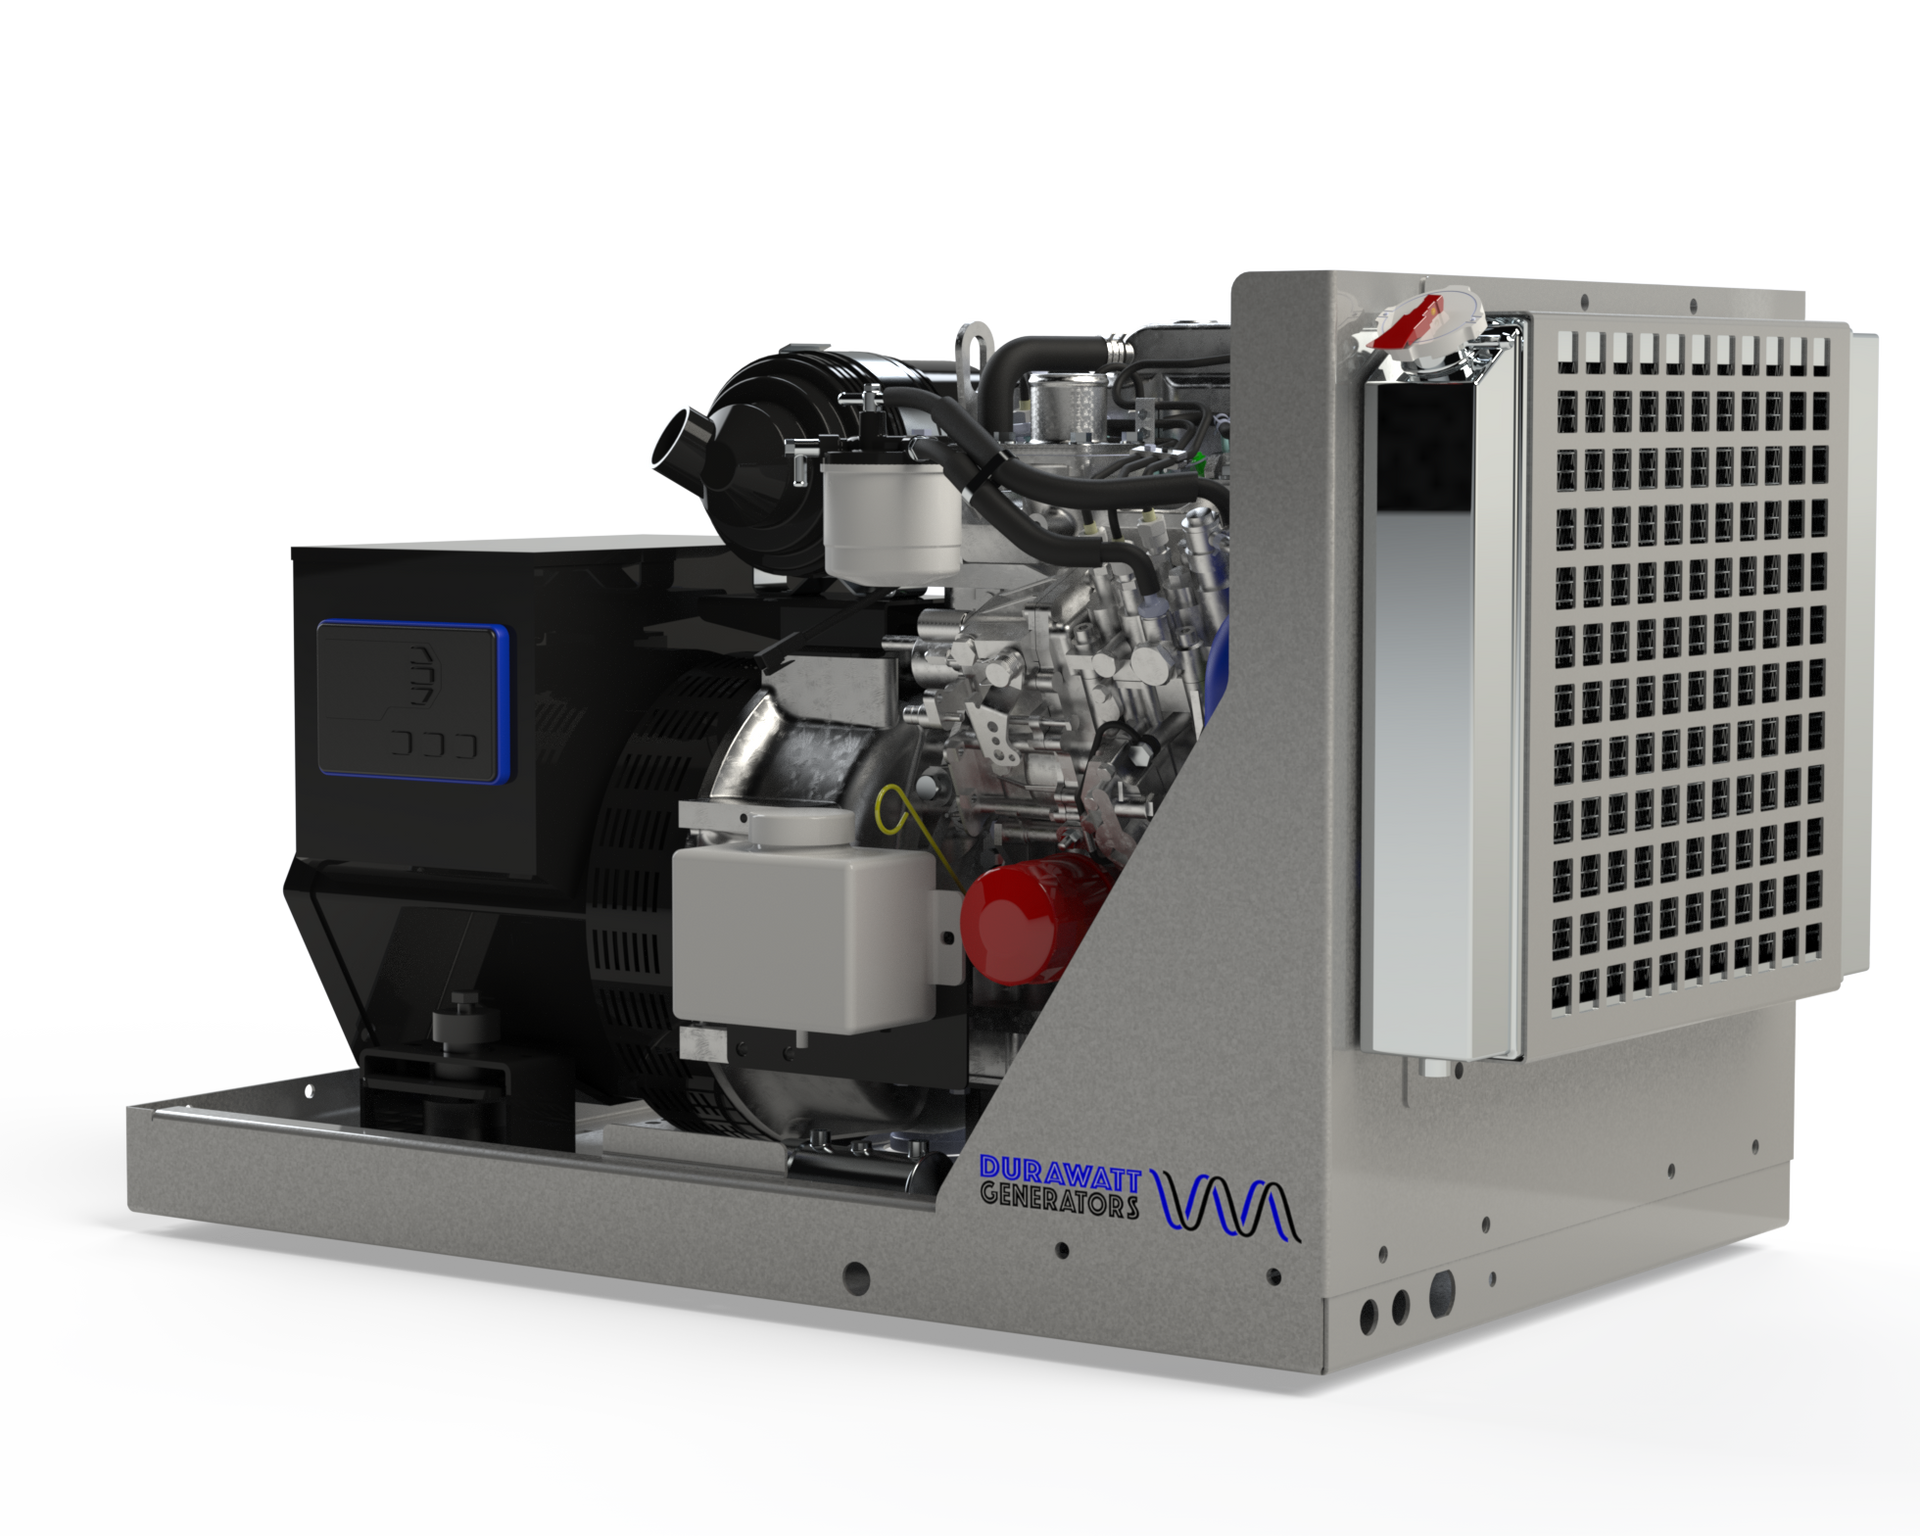 DuraWatt Generators is the largest manufacturer of custom diesel generators for food trucks, motorcoaches and backup power systems. 